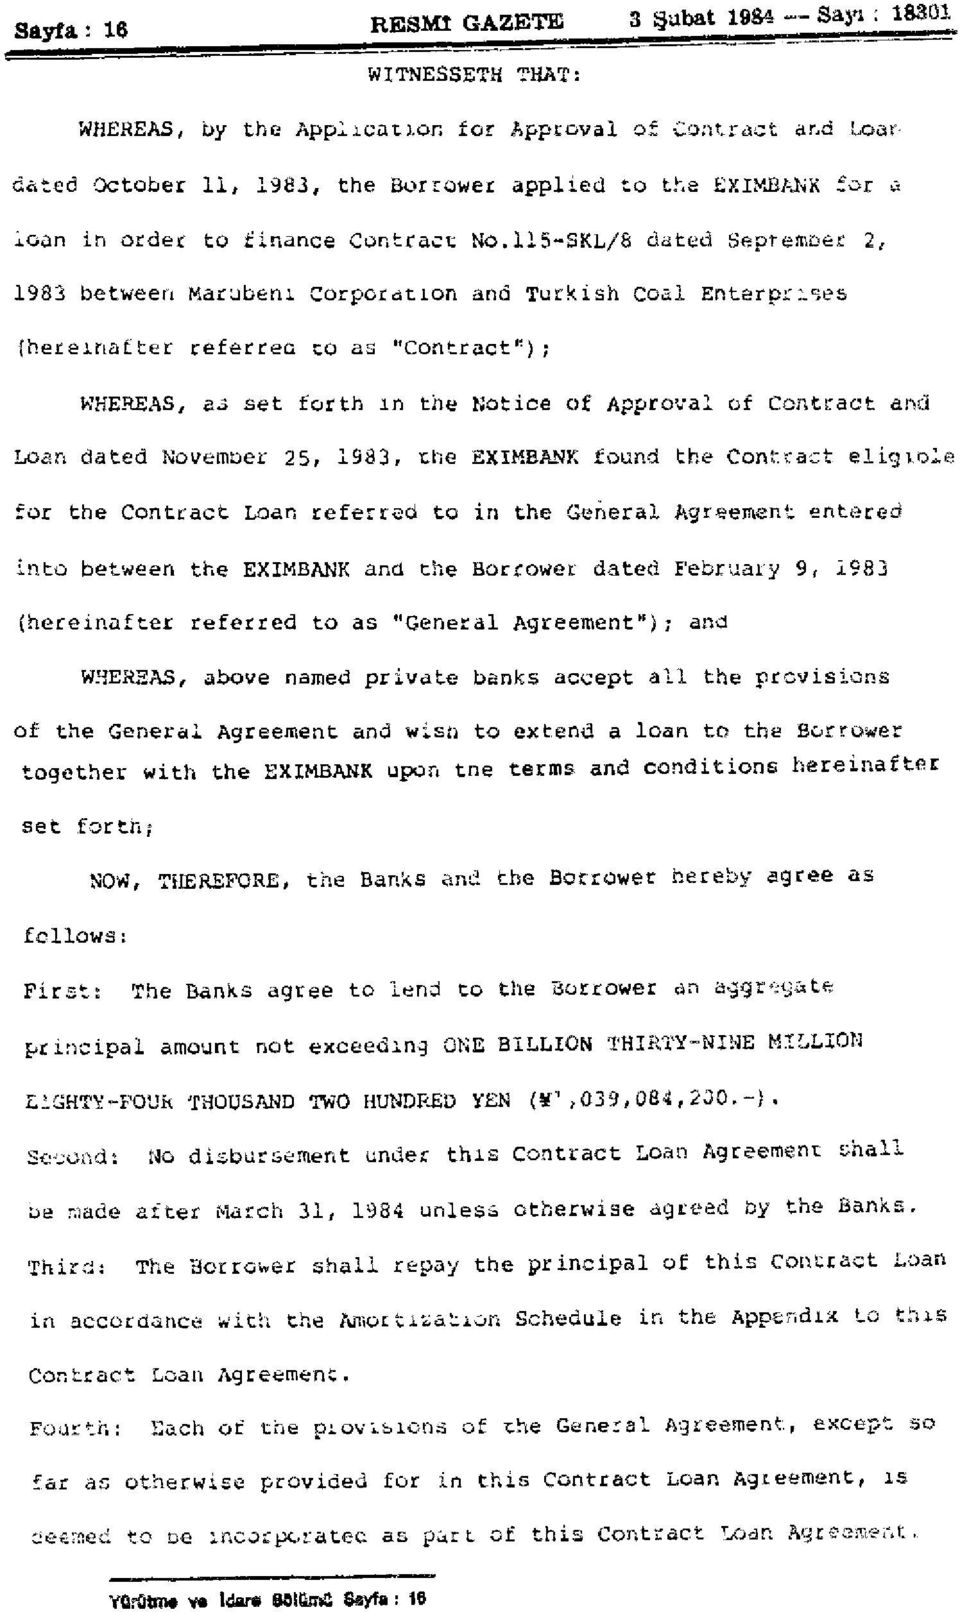 U5-SKL/8 dated September 2, 1983 between Marubeni Corporation and Turkish Coal Enterprises (hereinafter referrec to as "Contract 1 ') ; WHEREAS, as set forth in the Notice of Approval of Contract and